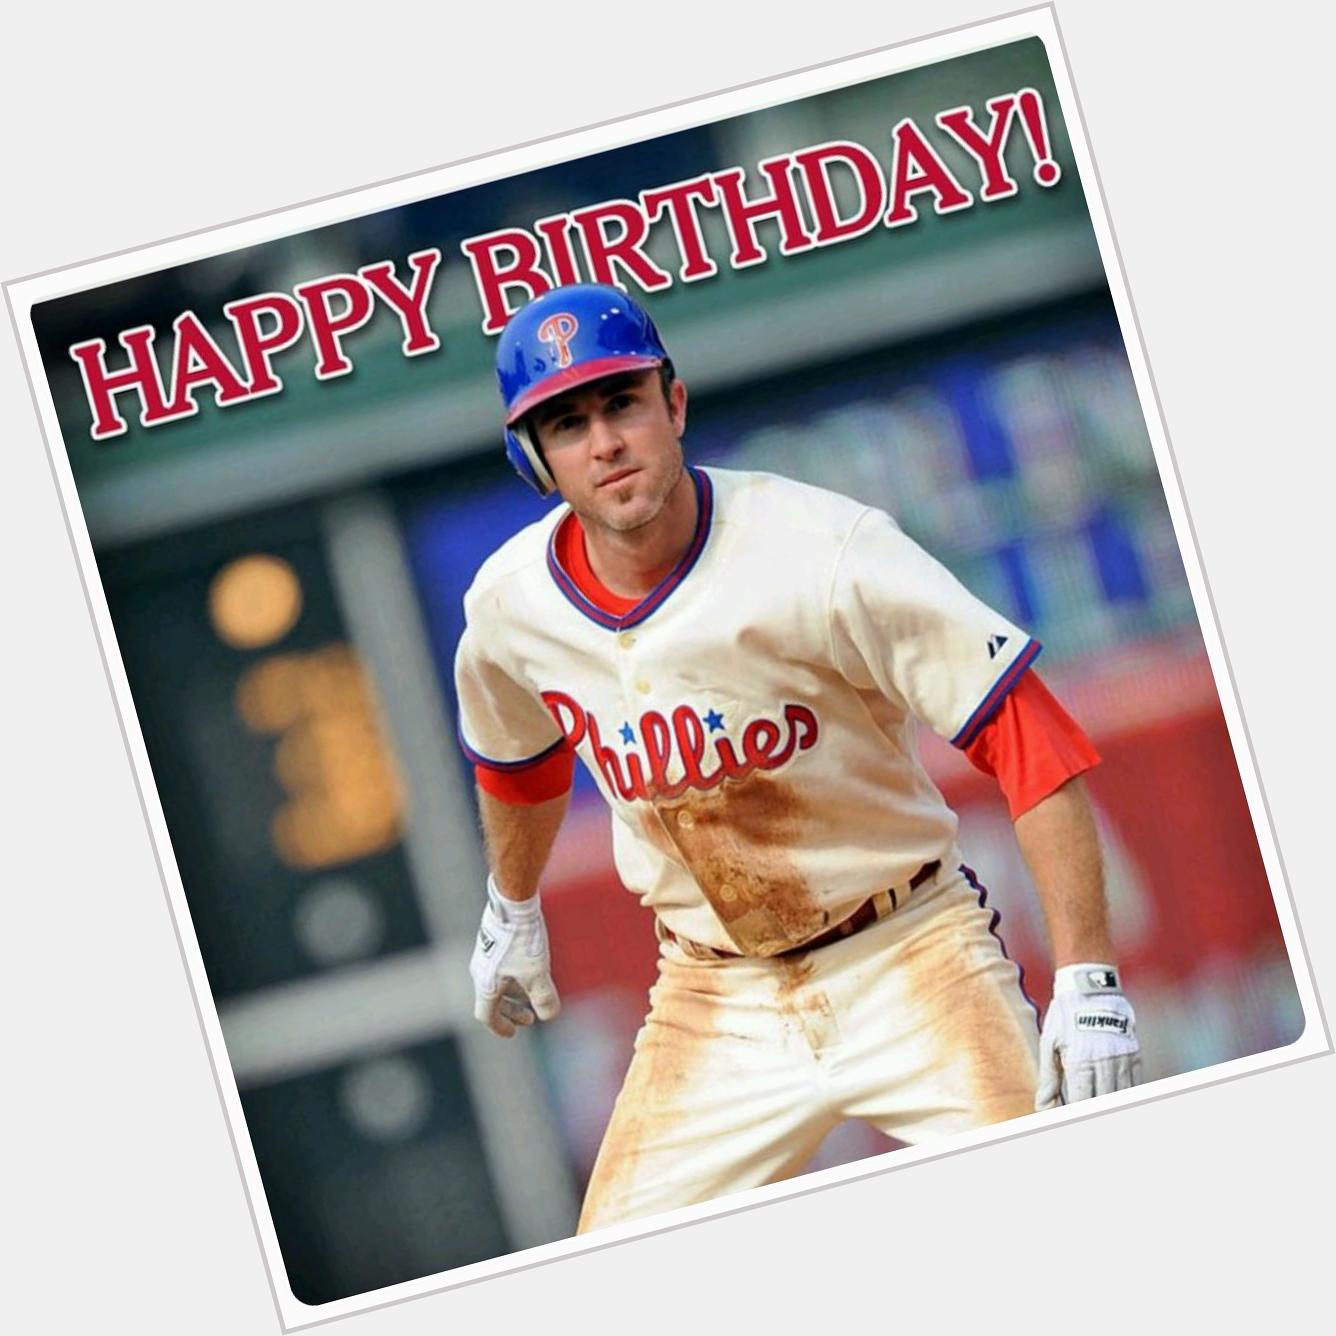 Wishing a very Happy Birthday! "Chase Utley, YOU ARE THE MAN!"   